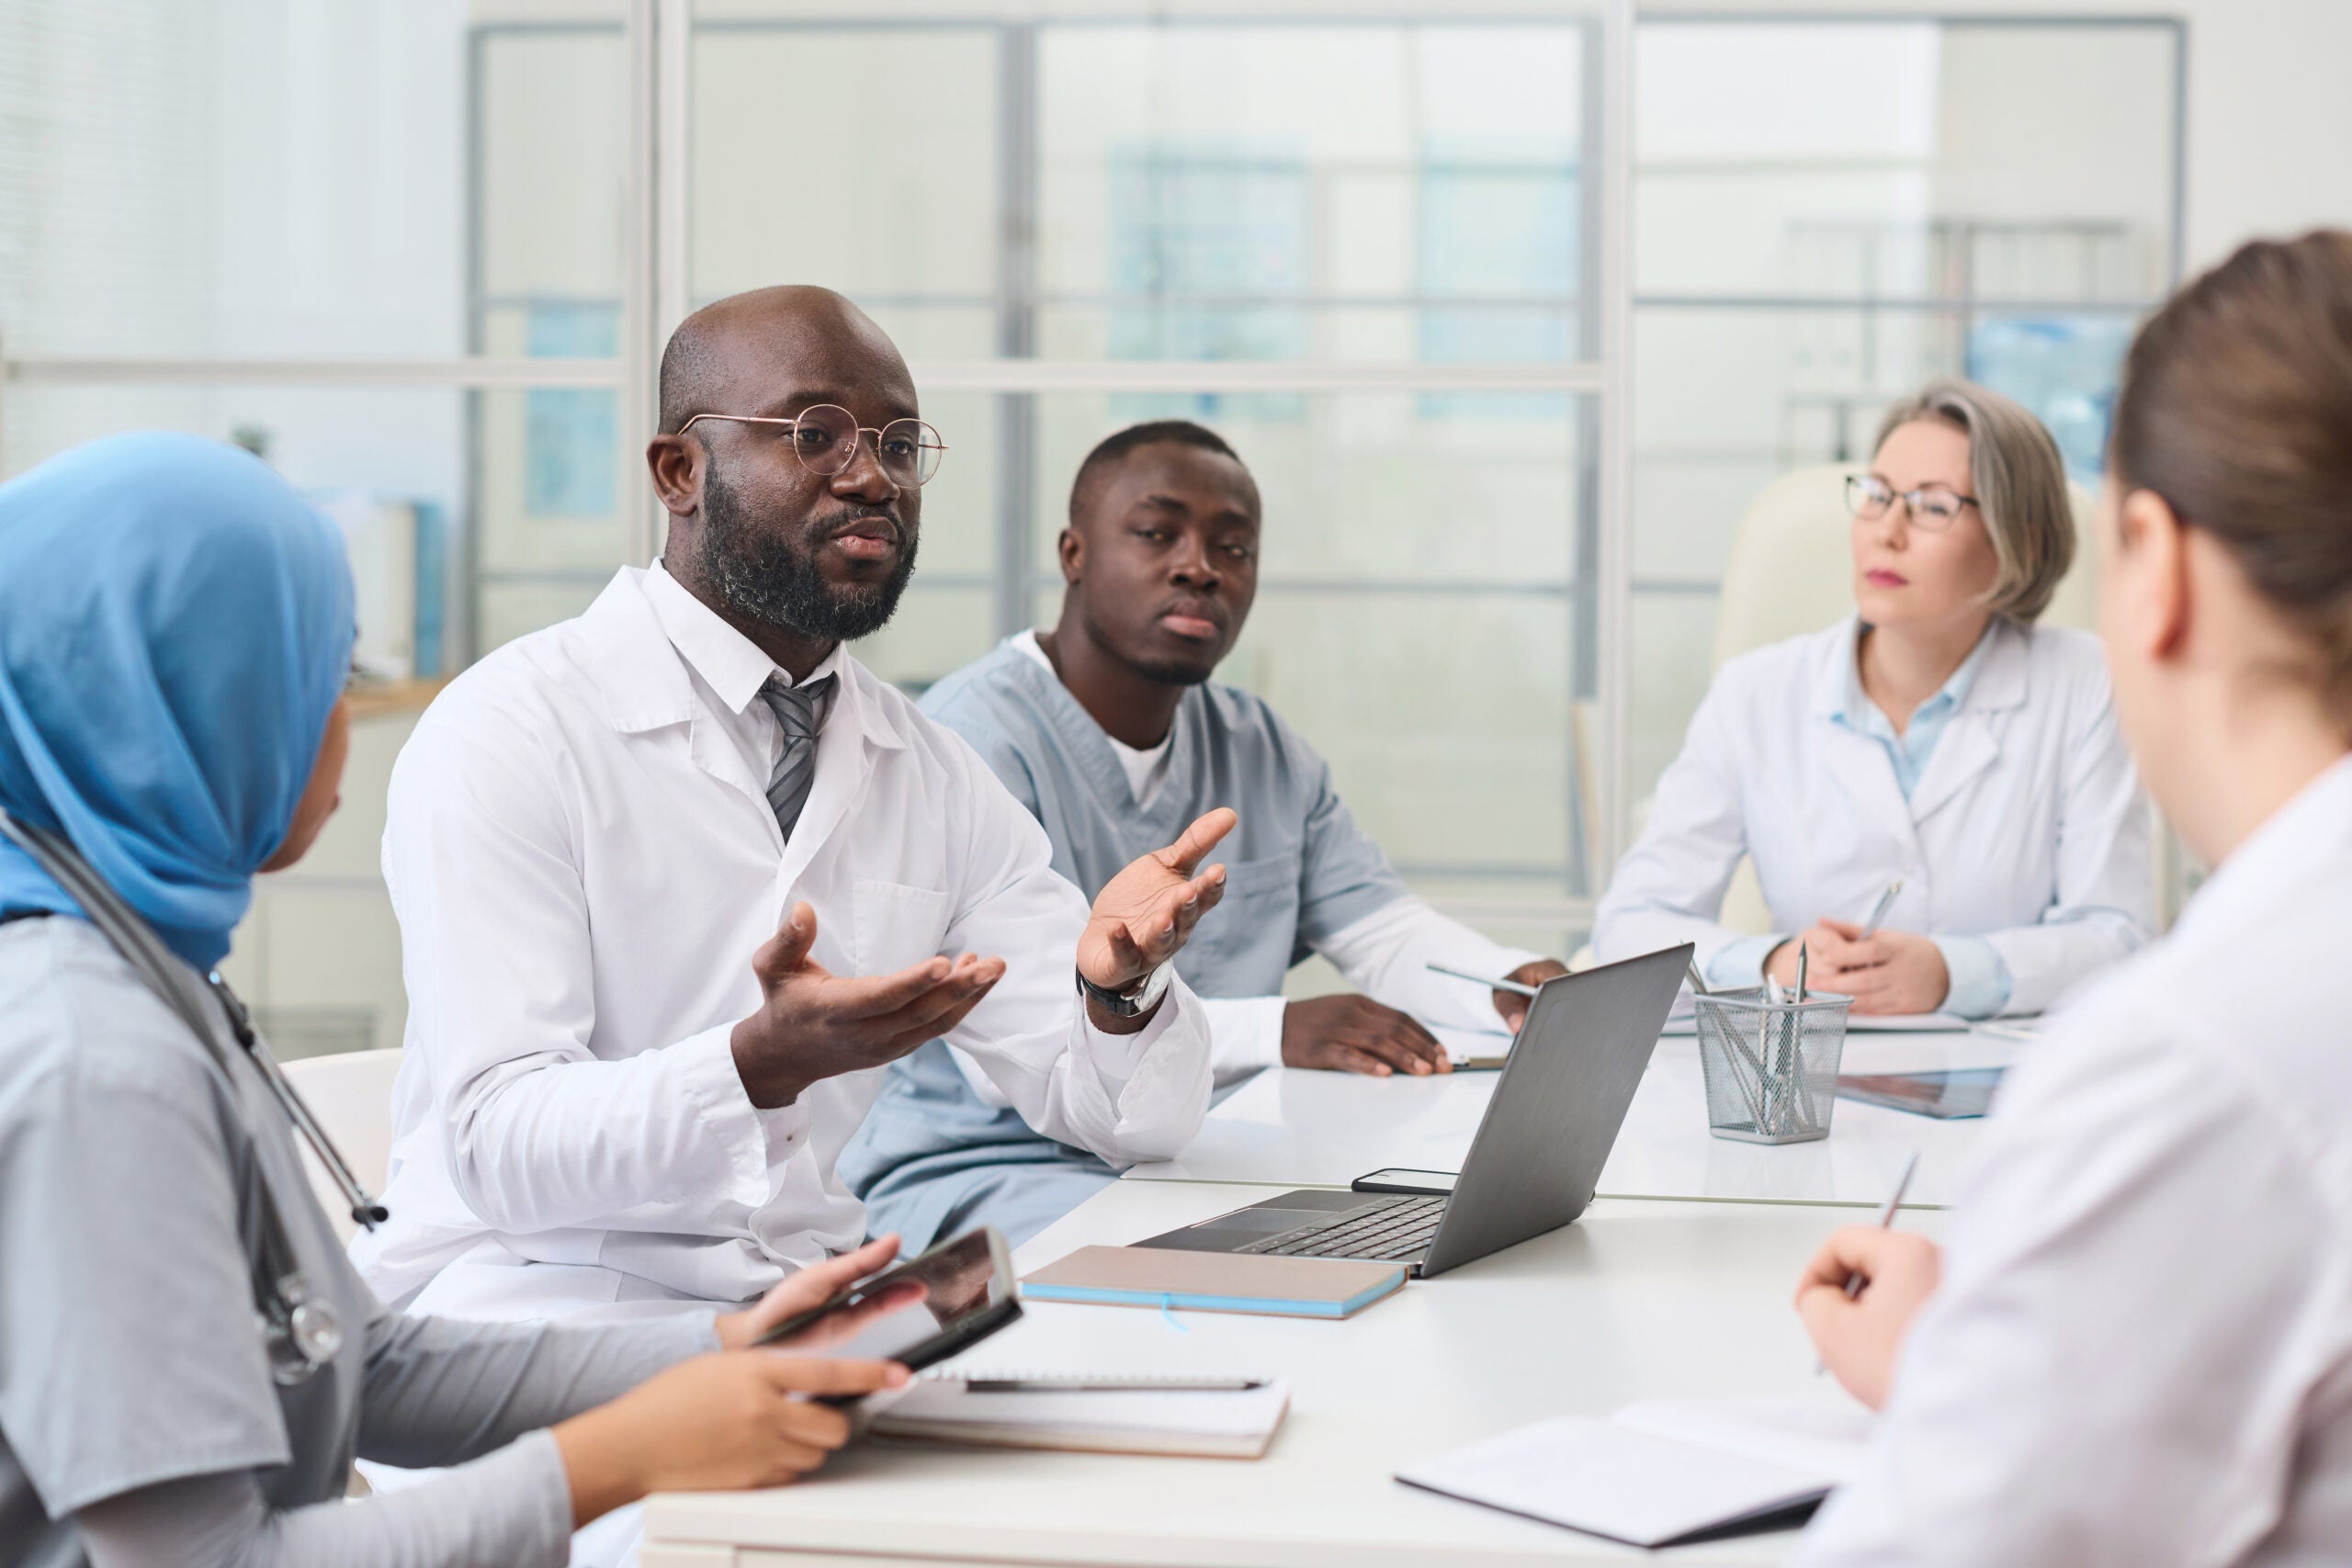 Doctor talking to other doctors and nurses at meeting